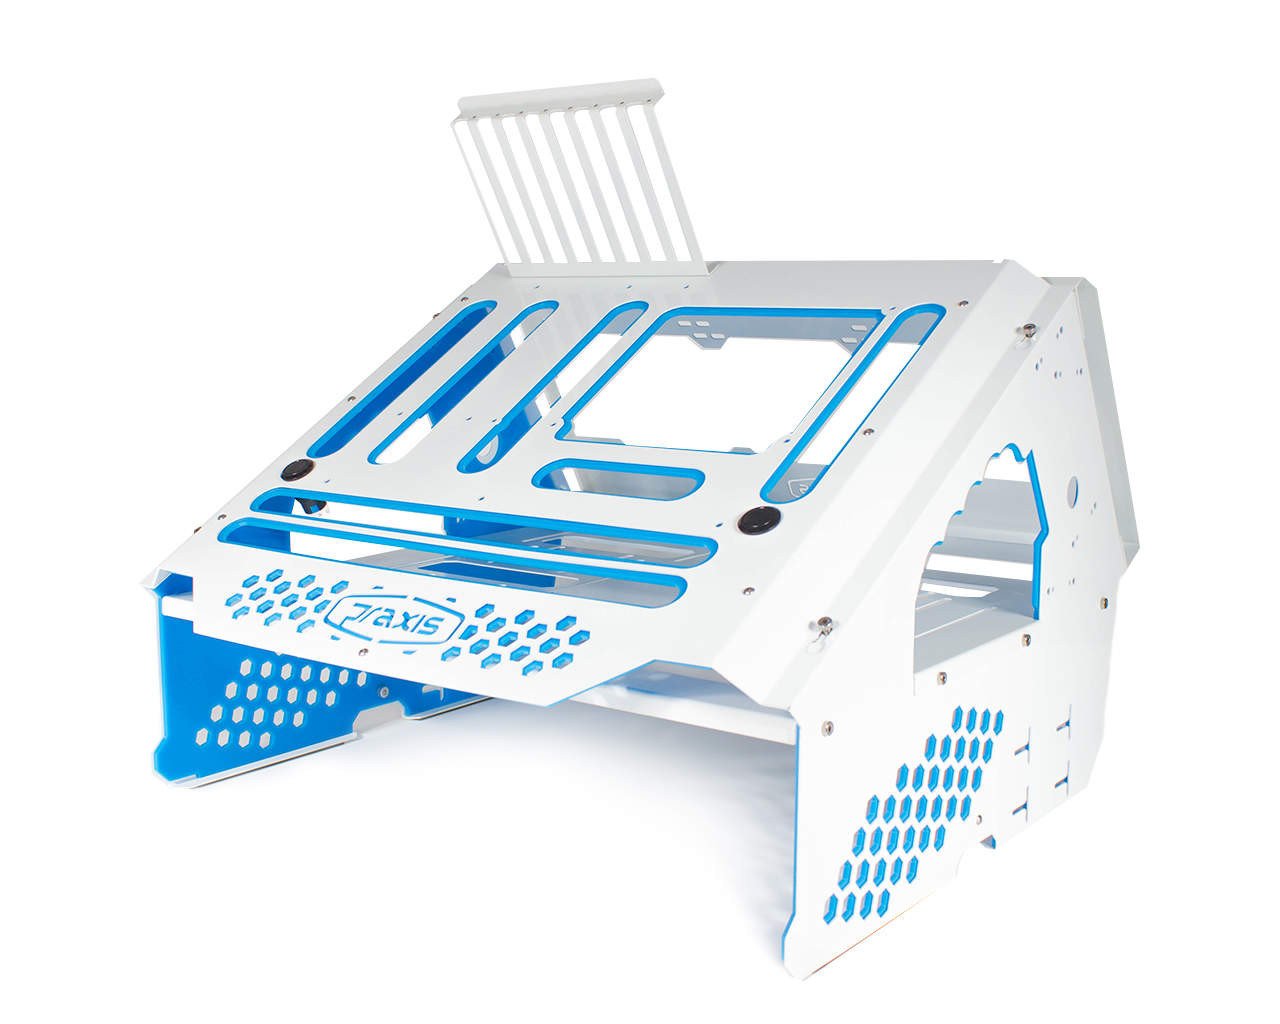 PrimoChill's Praxis Wetbench Powdercoated Steel Modular Open Air Computer Test Bench for Watercooling or Air Cooled Components - PrimoChill - KEEPING IT COOL White w/Solid Light Blue Accents